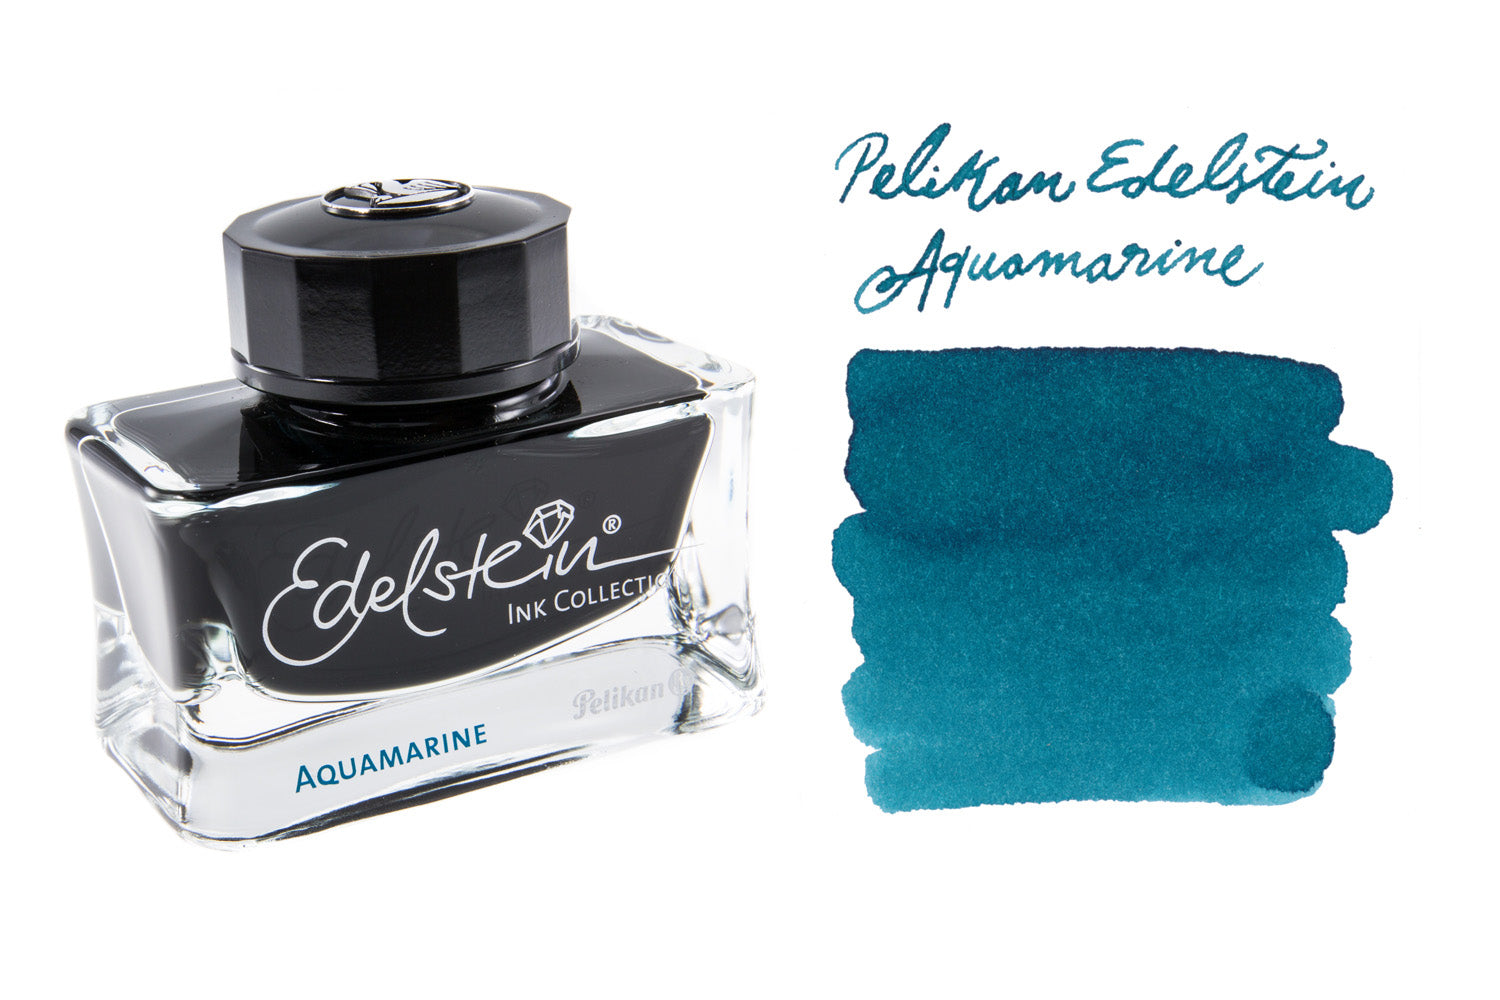 Pelikan Fountain Pens and Ink - The Goulet Pen Company